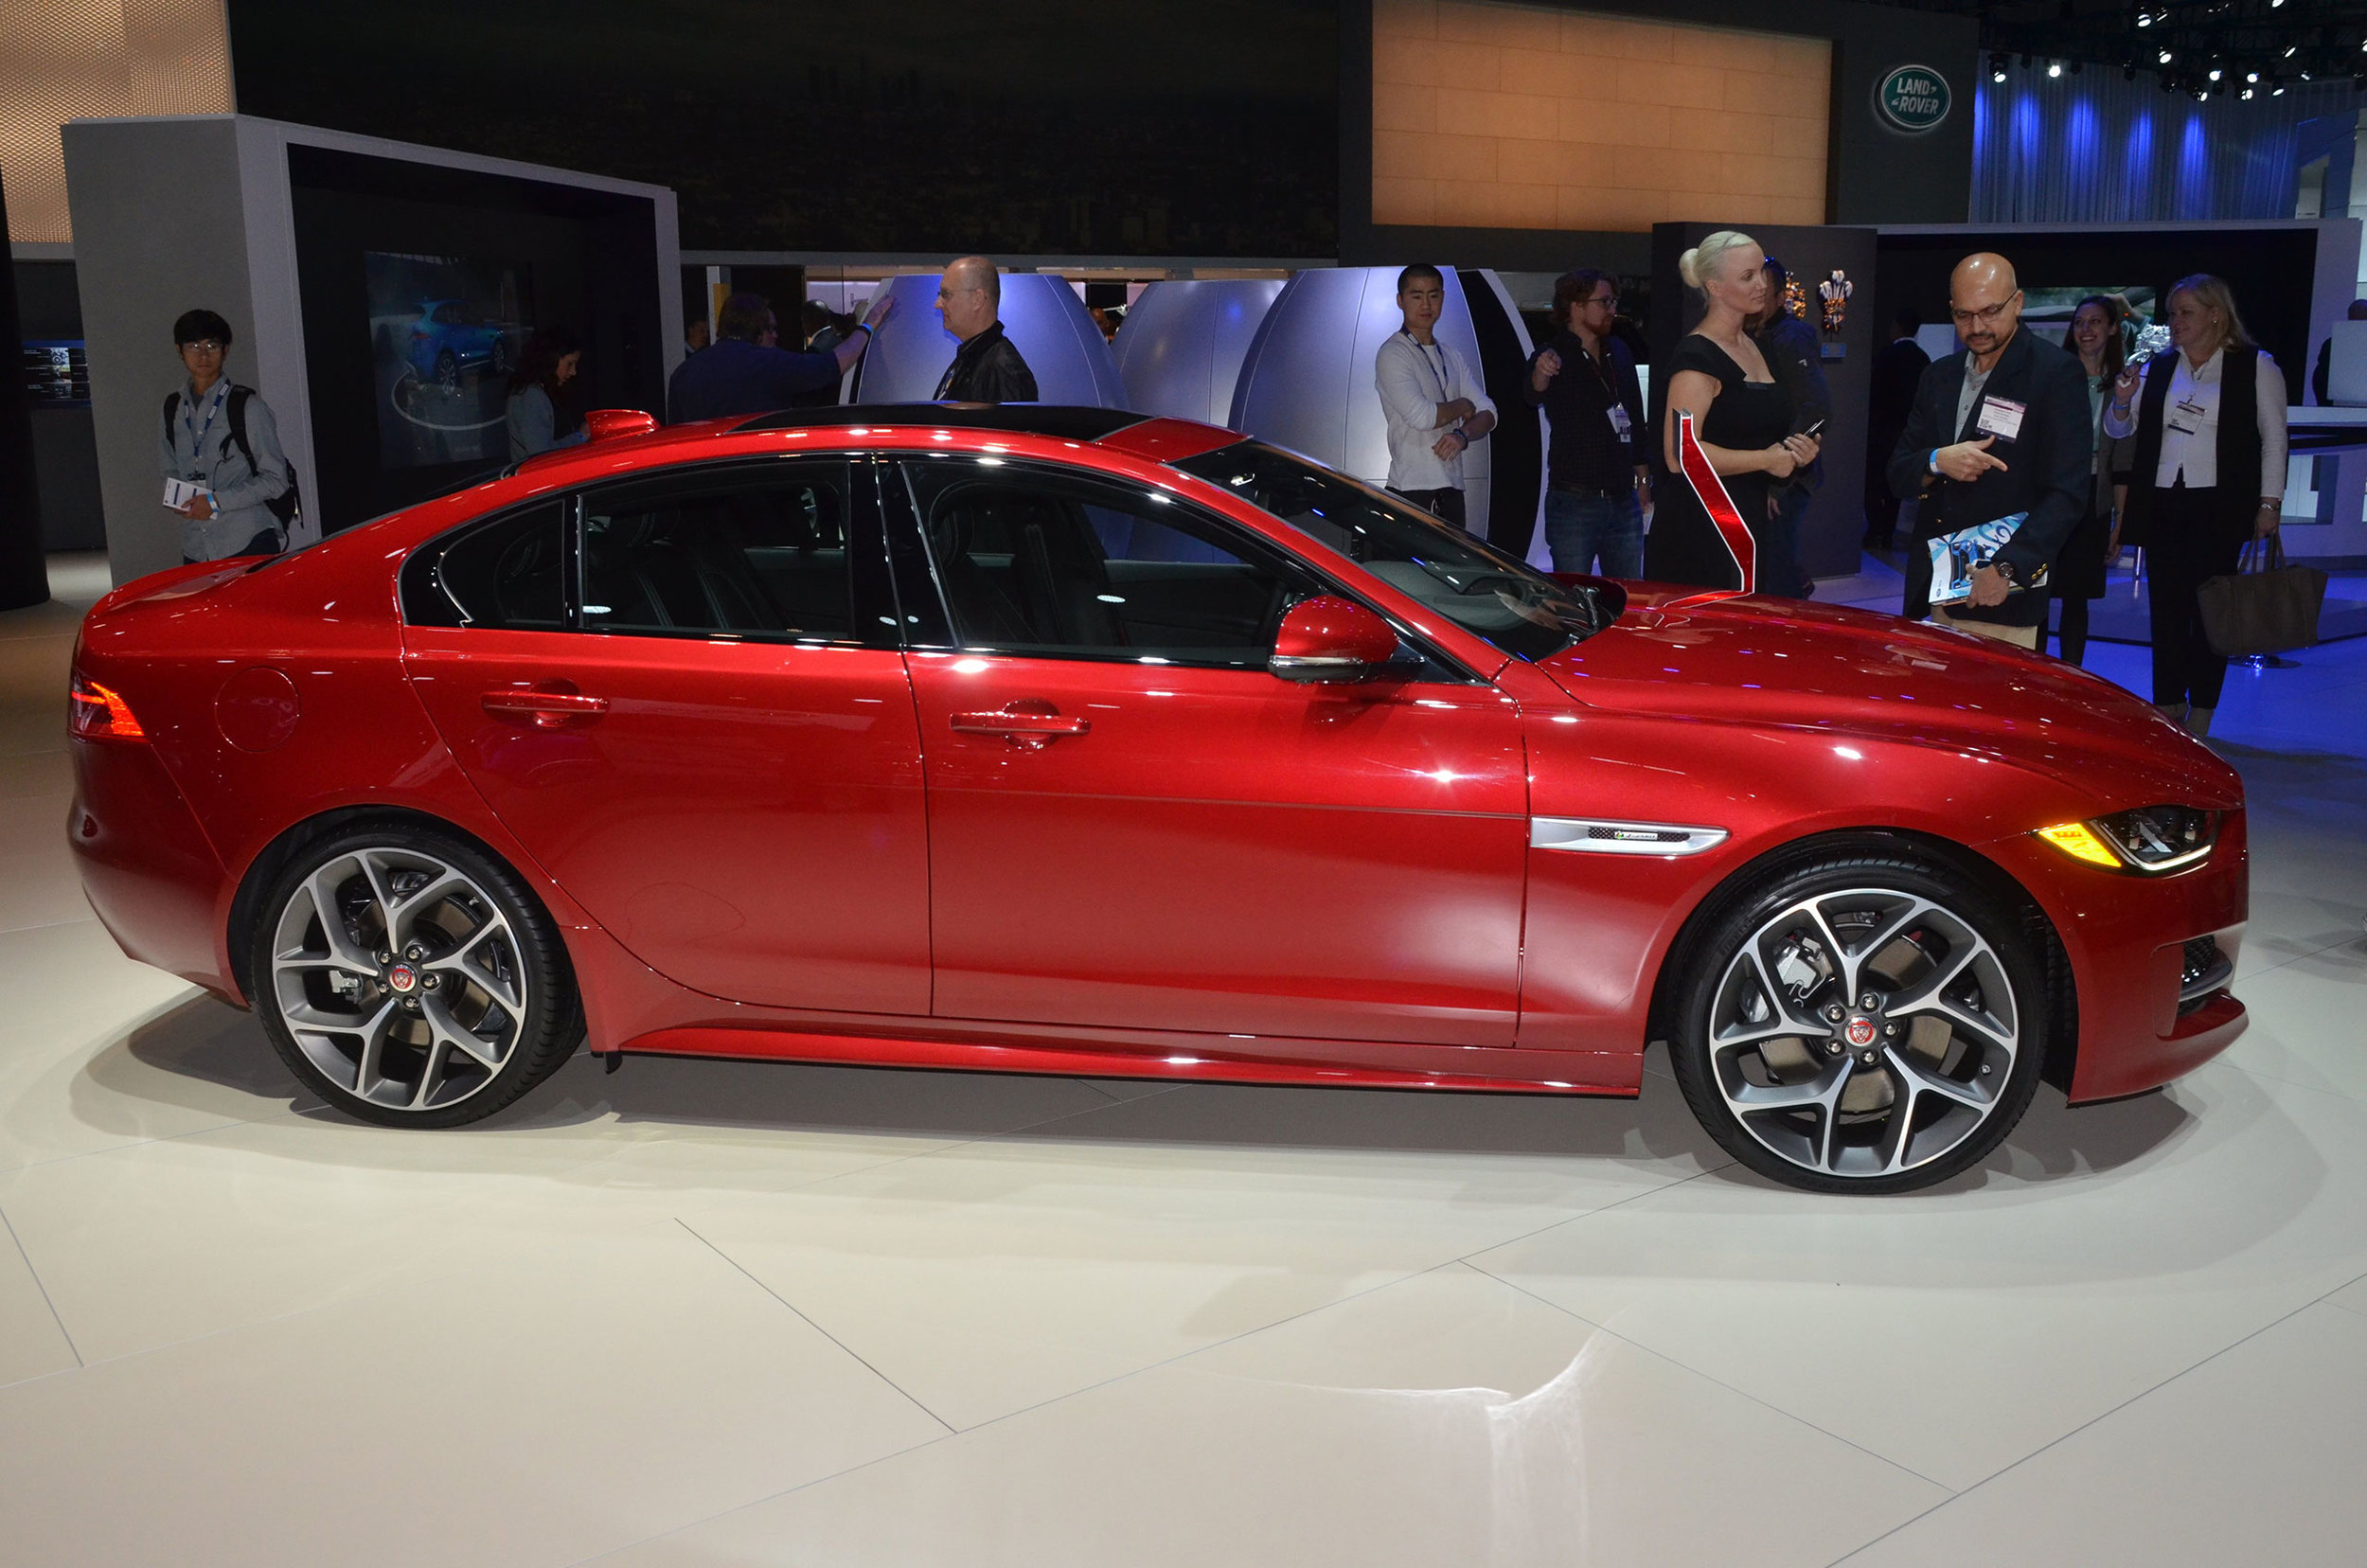 Jaguar XE gets AWD and new engine option